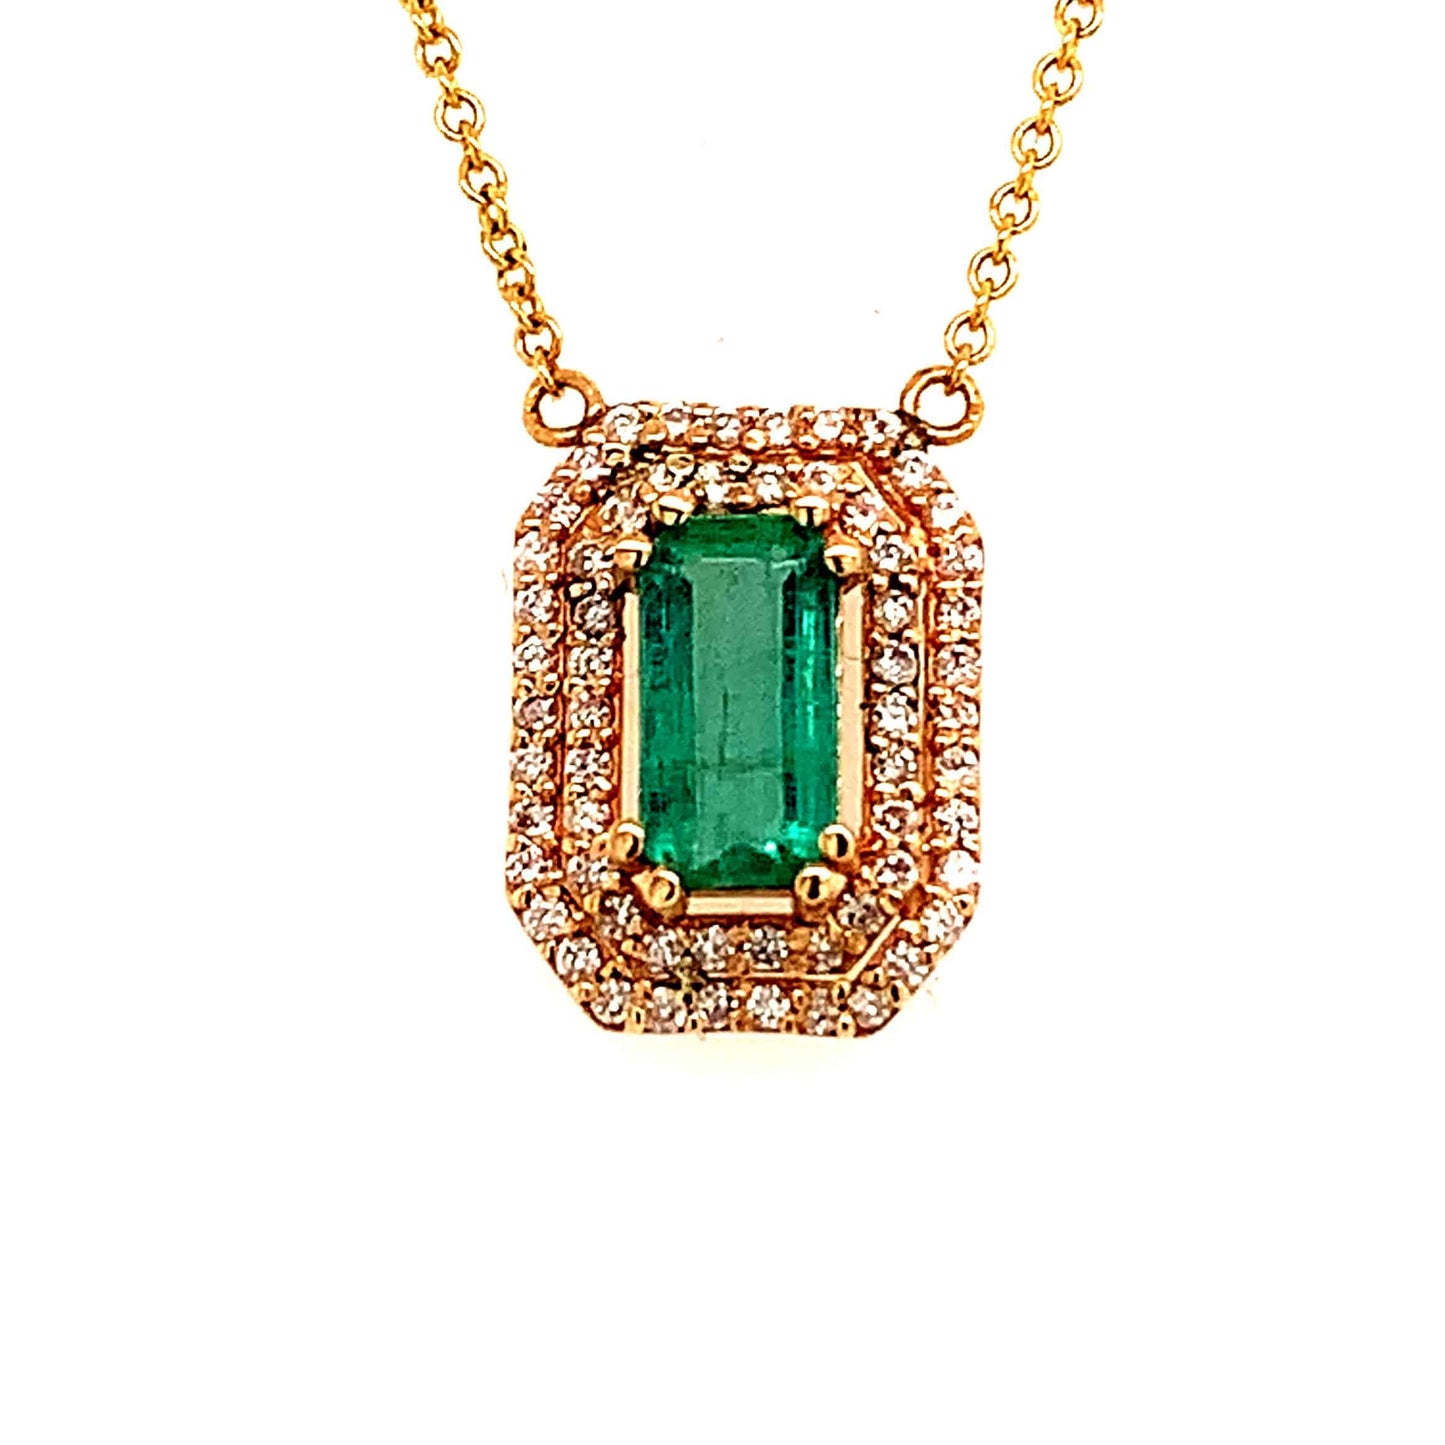 Natural Emerald Diamond Necklace 14k Gold 1.21 TCW 16" Certified $4,950 112176 - Certified Fine Jewelry